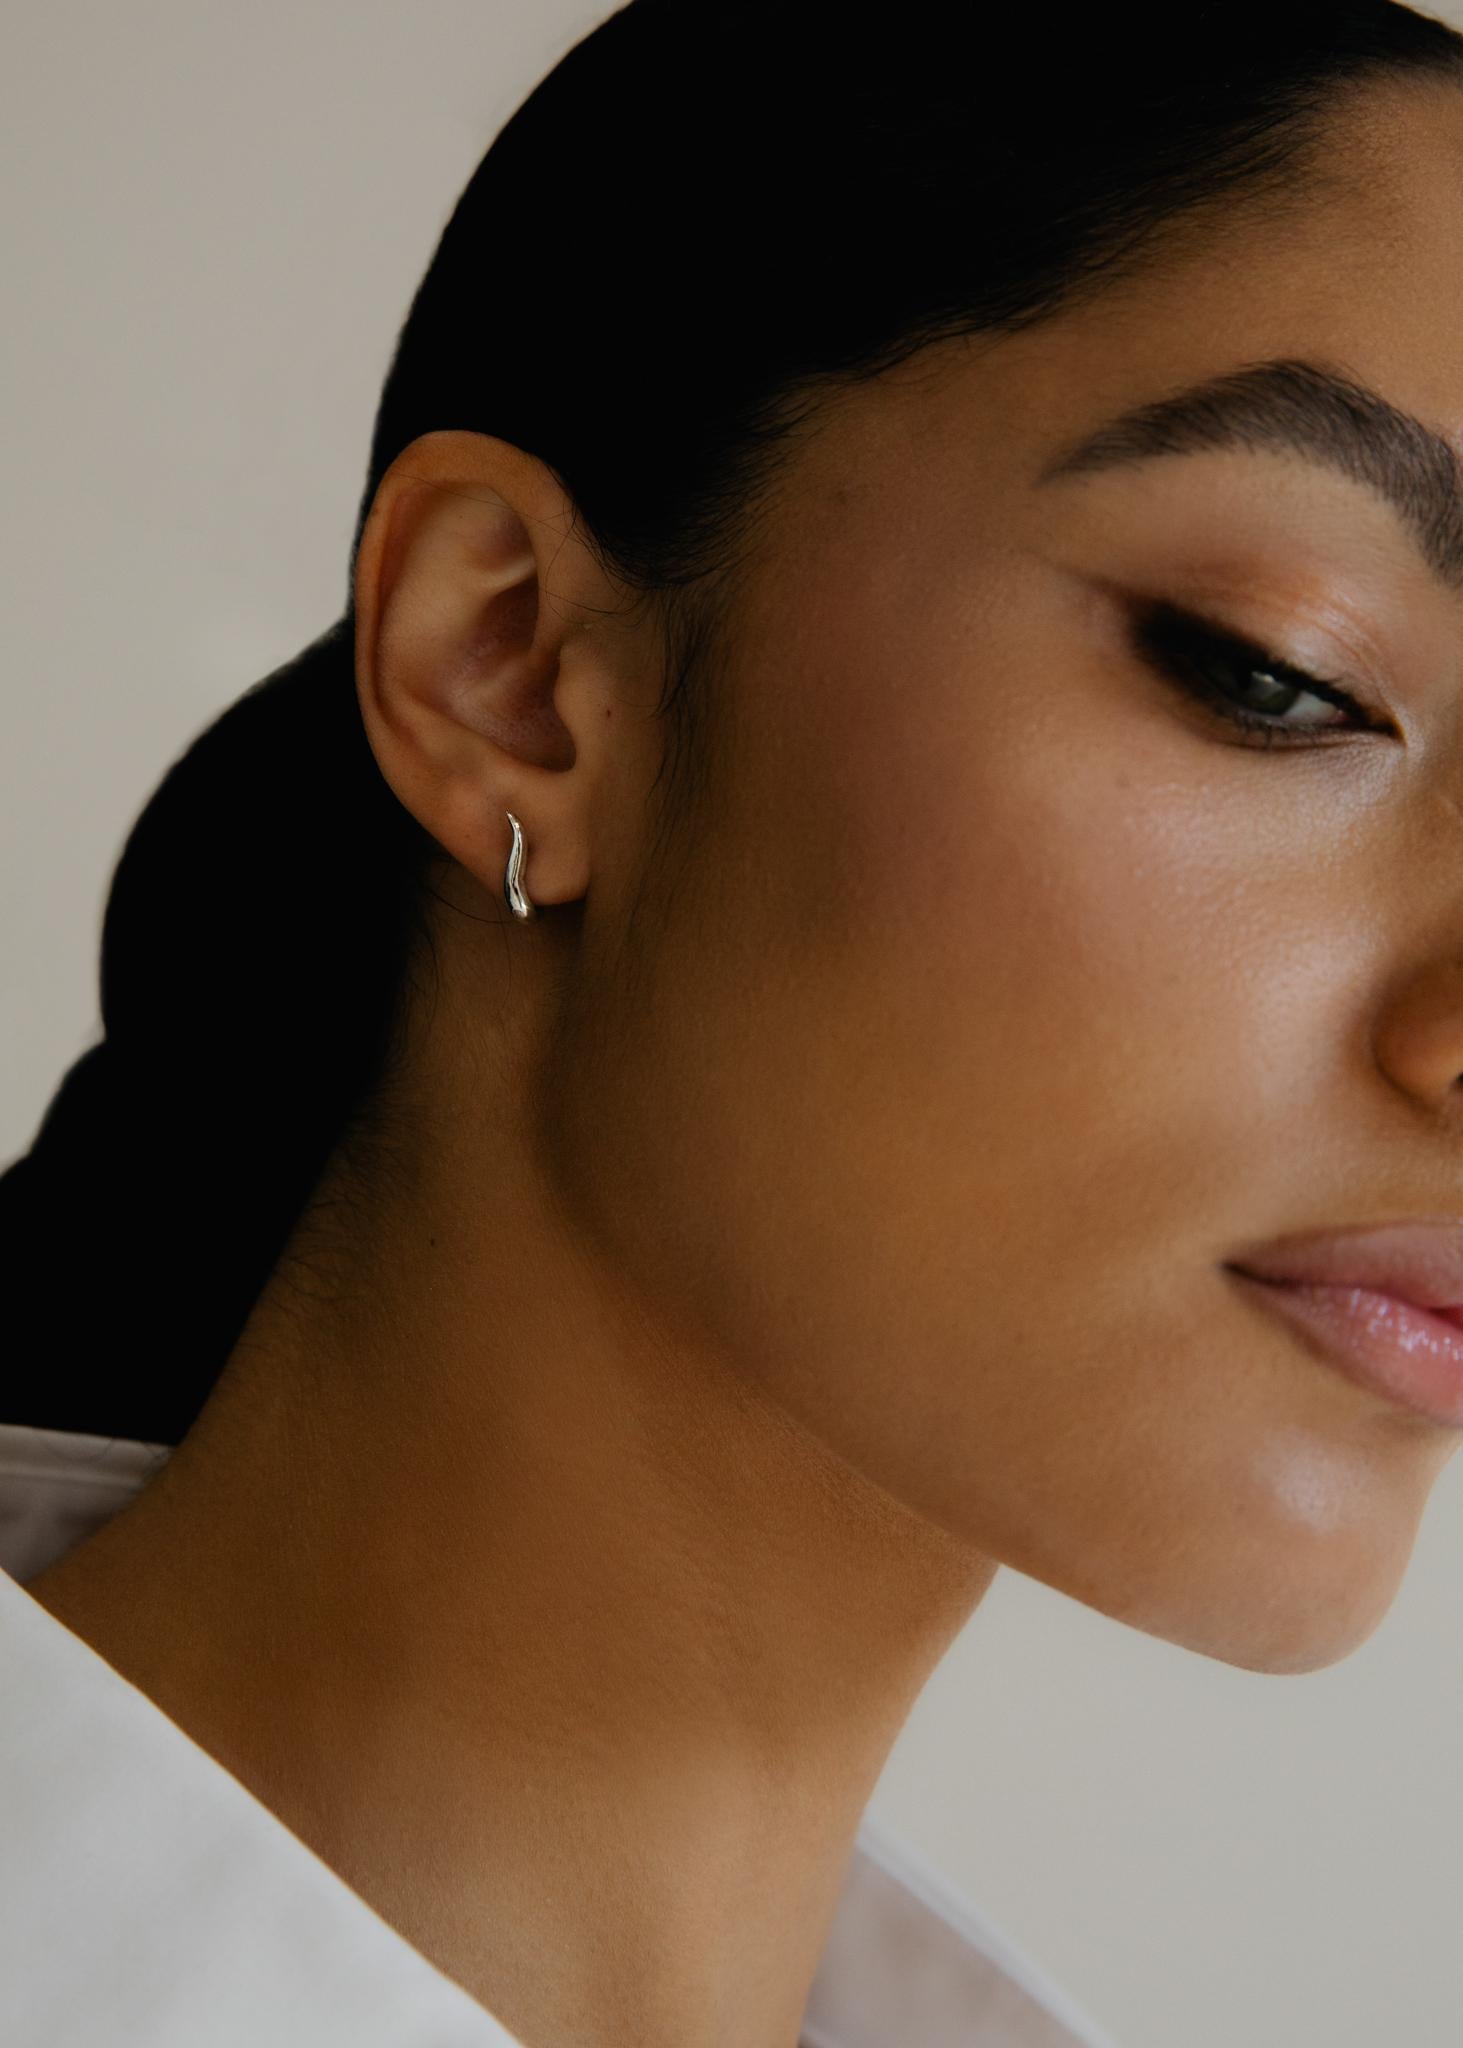 Organically shaped delicate hoops designed to sit closely to your ear.

-sterling silver
-post and pushback closure
-sold as a pair

Each Ruth Nyc piece is handmade to order in our NYC studios. Each piece is designed to become a personal talisman, a